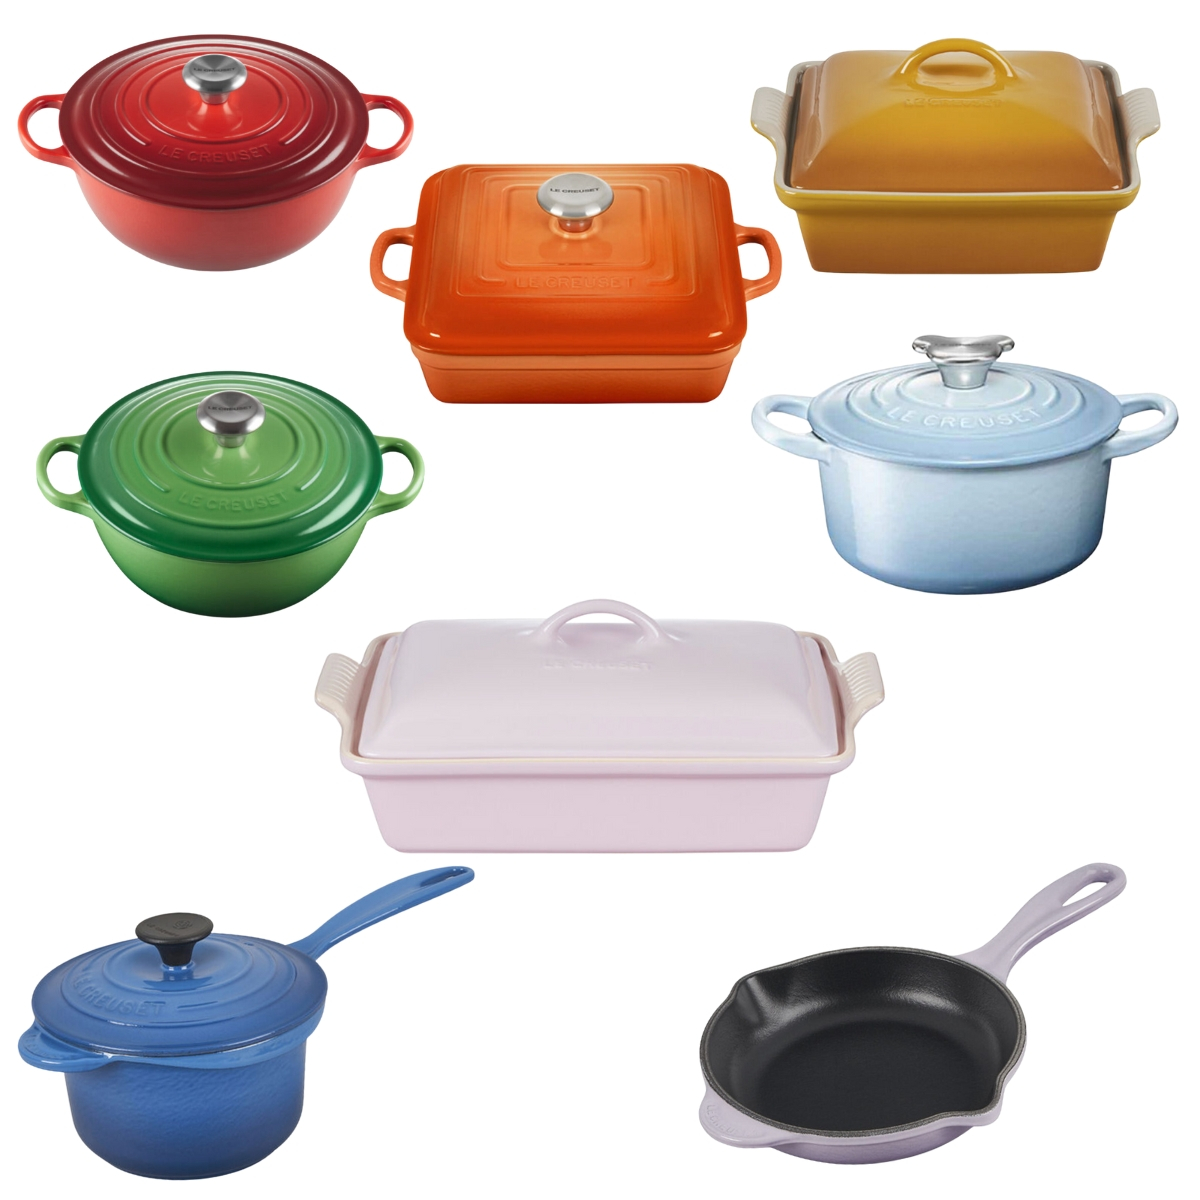 Don’t Miss These Rare 50% Off Deals on Le Creuset Cookware